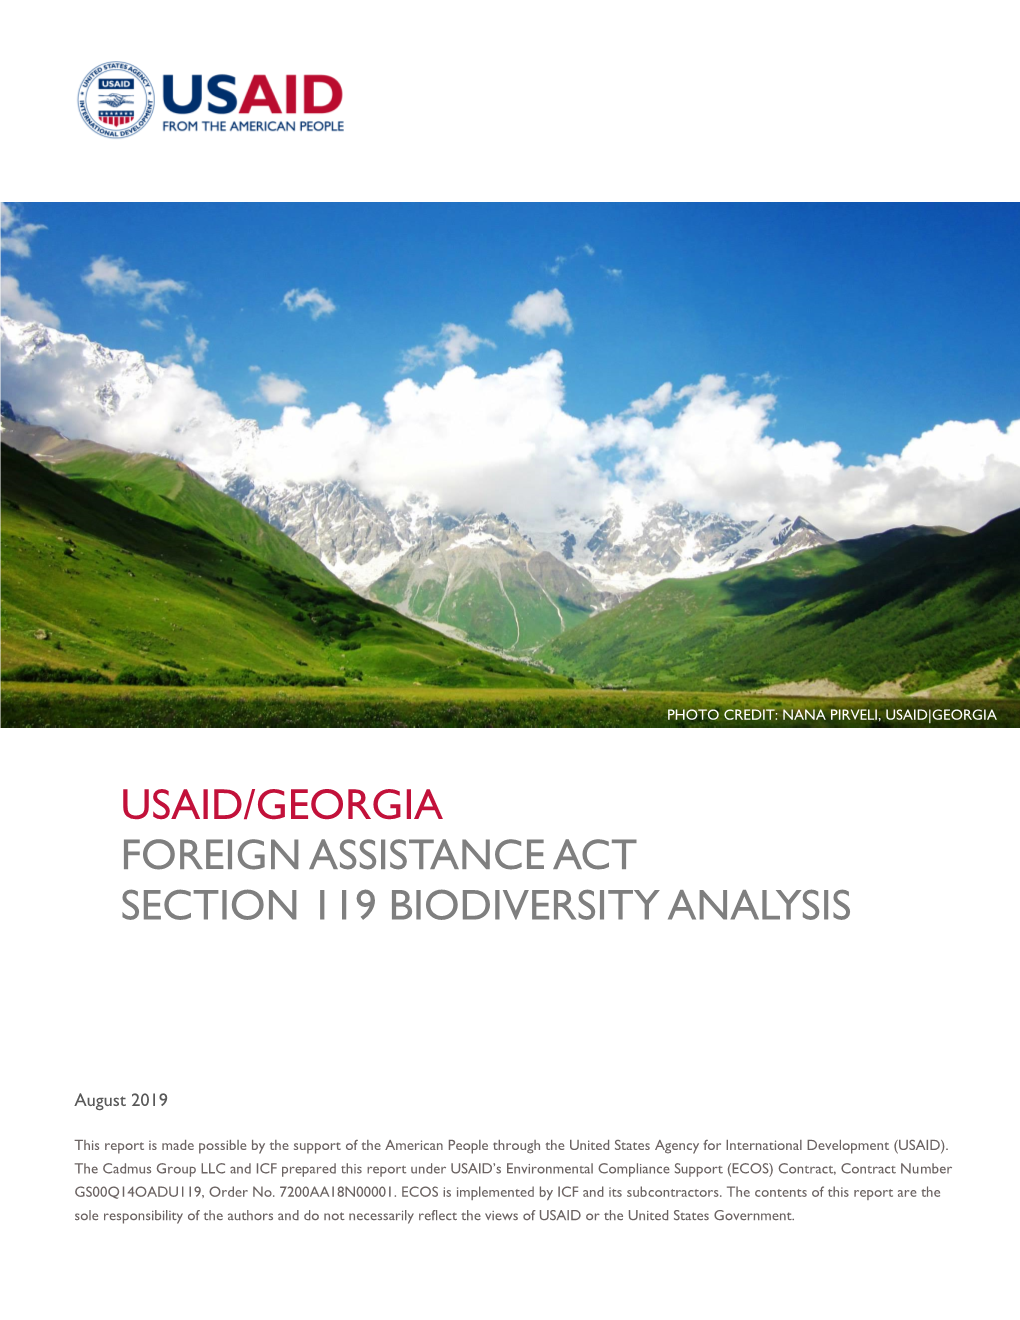 Usaid/Georgia Foreign Assistance Act Section 119 Biodiversity Analysis